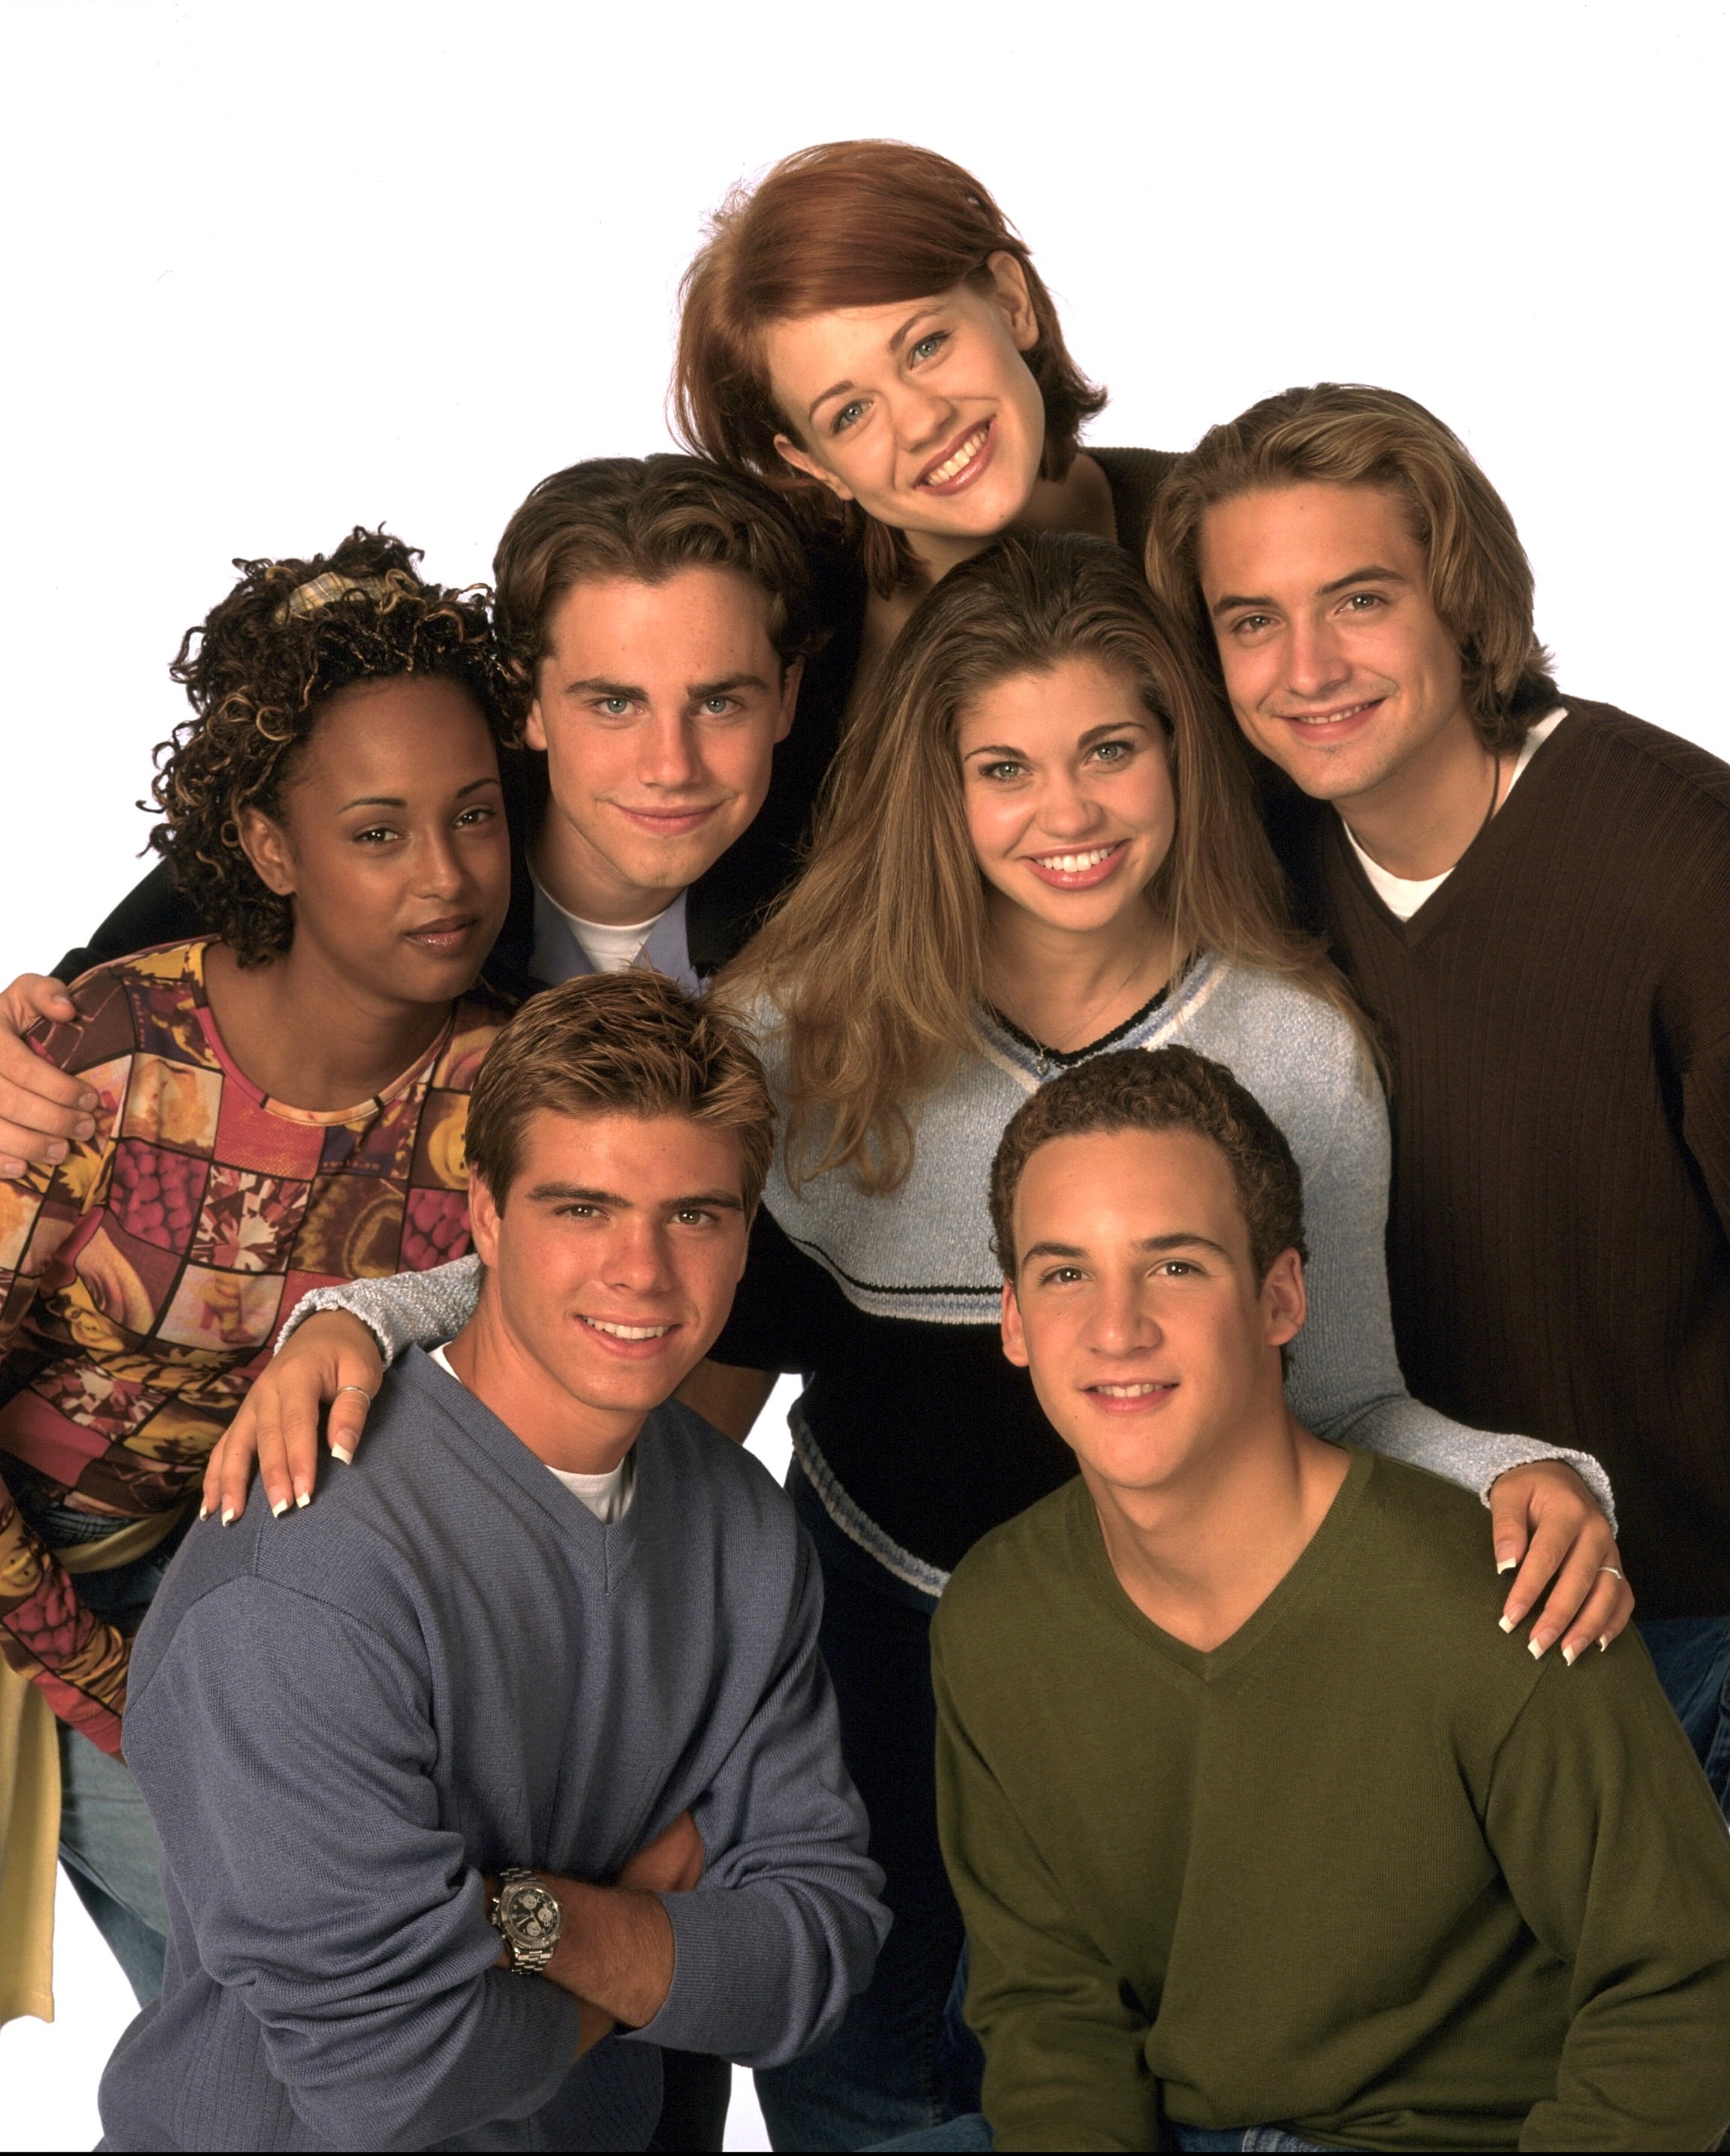 The cast of 'Boy Meets World' pose for a promotional photo